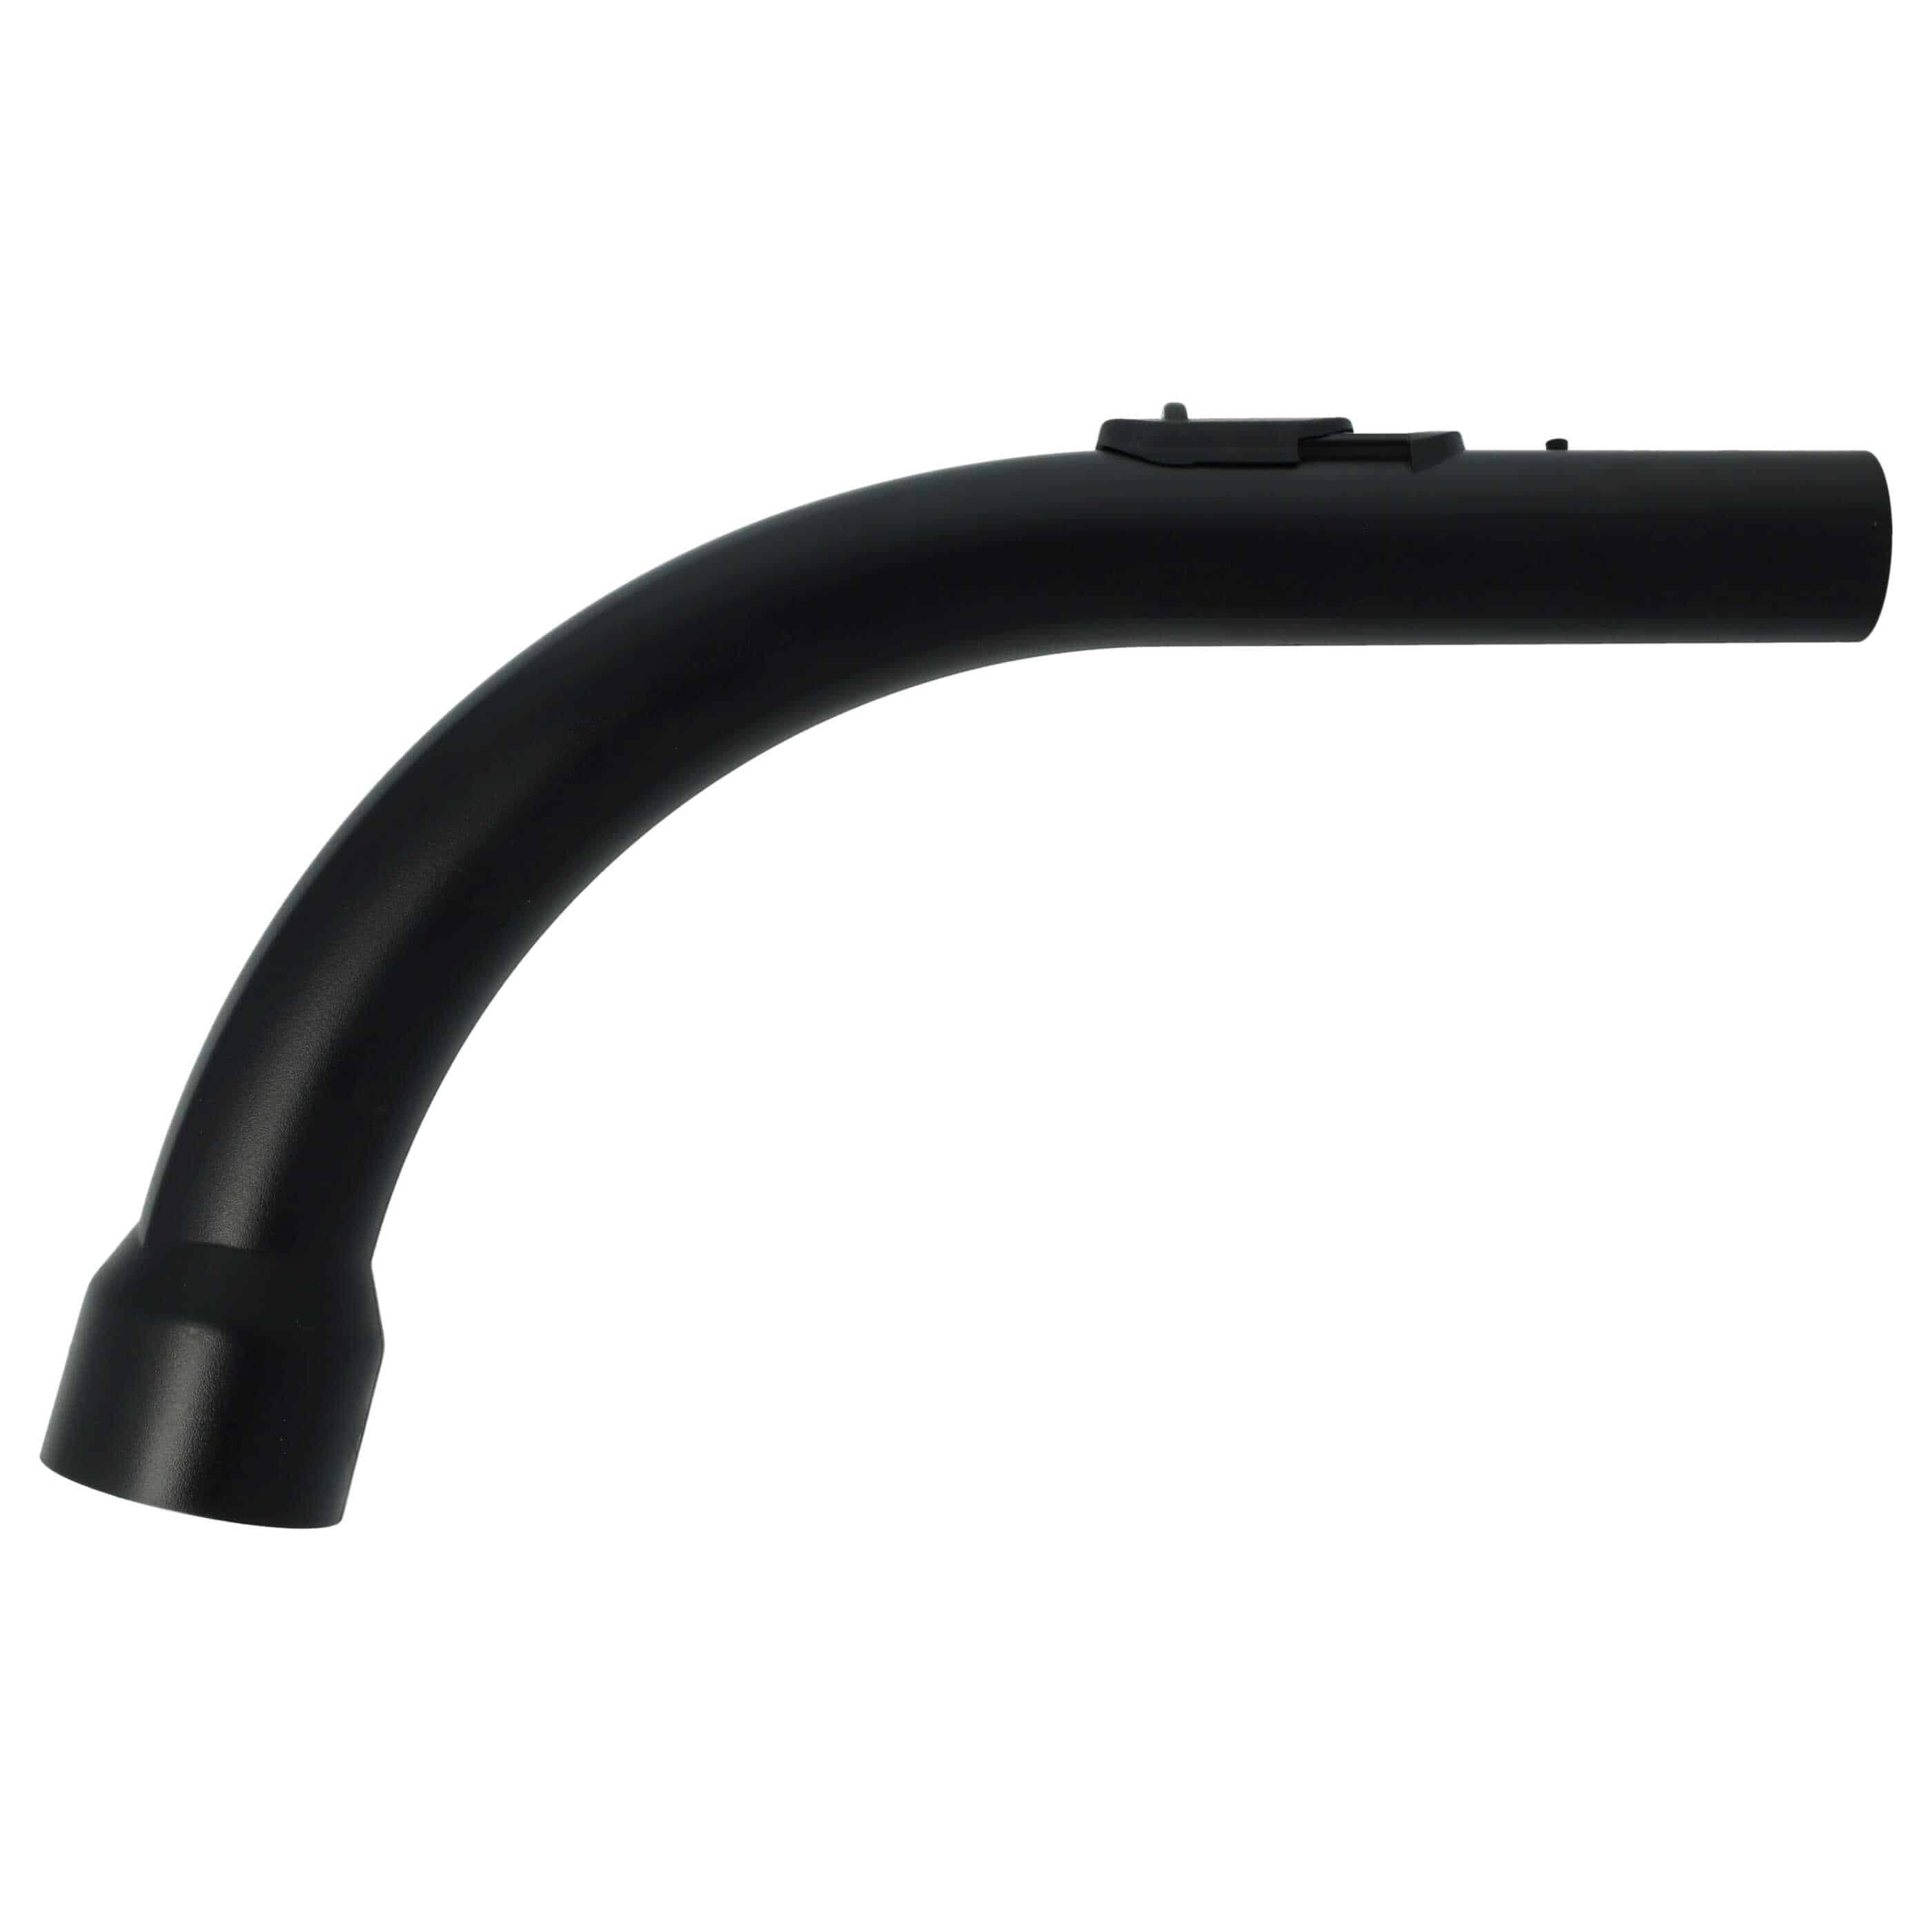 Vacuum Cleaner Handle as Replacement for Miele Vacuum Cleaner Handle 52690919442601 35 mm Diameter